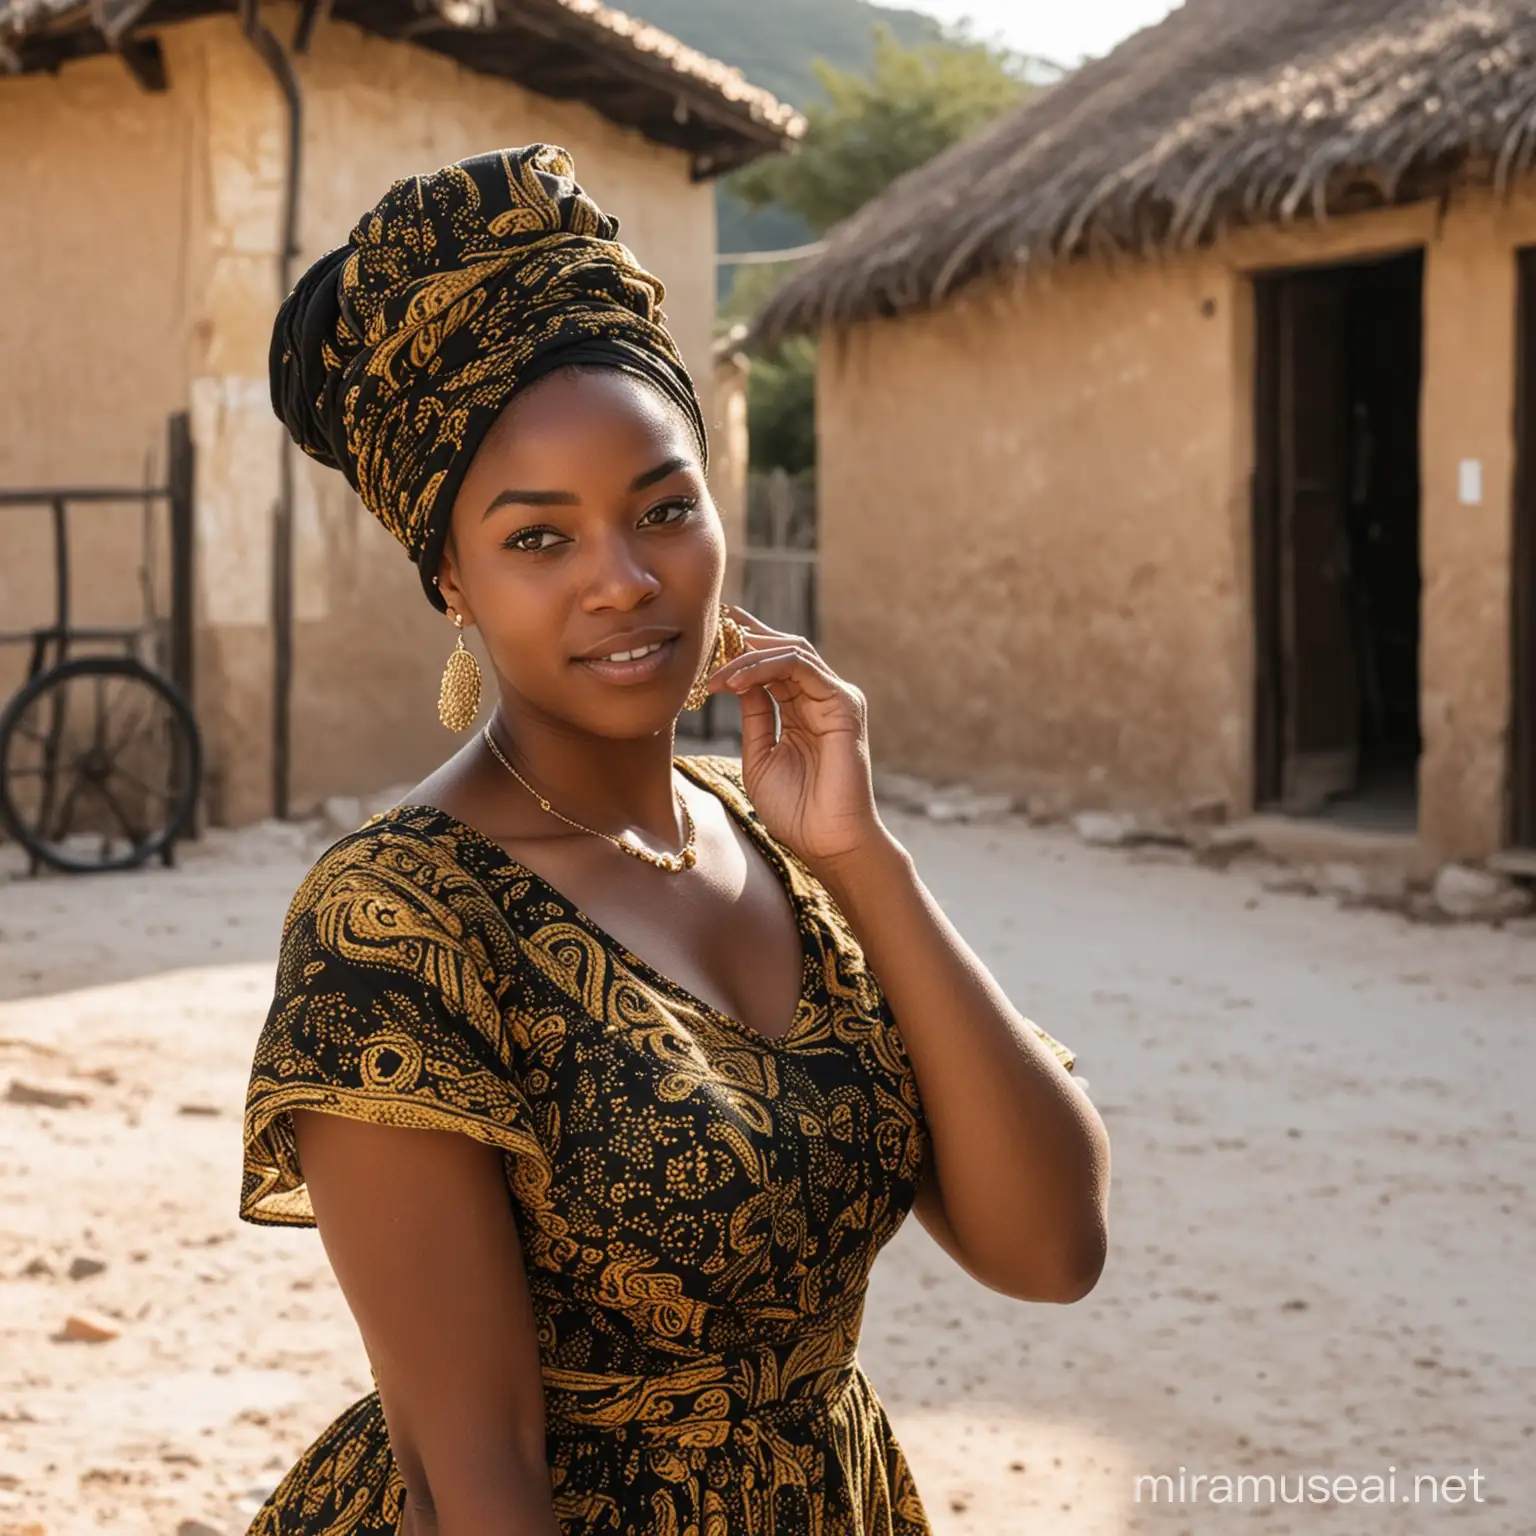 A modest black woman turning into a Pilar of salt in a village , the woman black and gold head wrap and dress